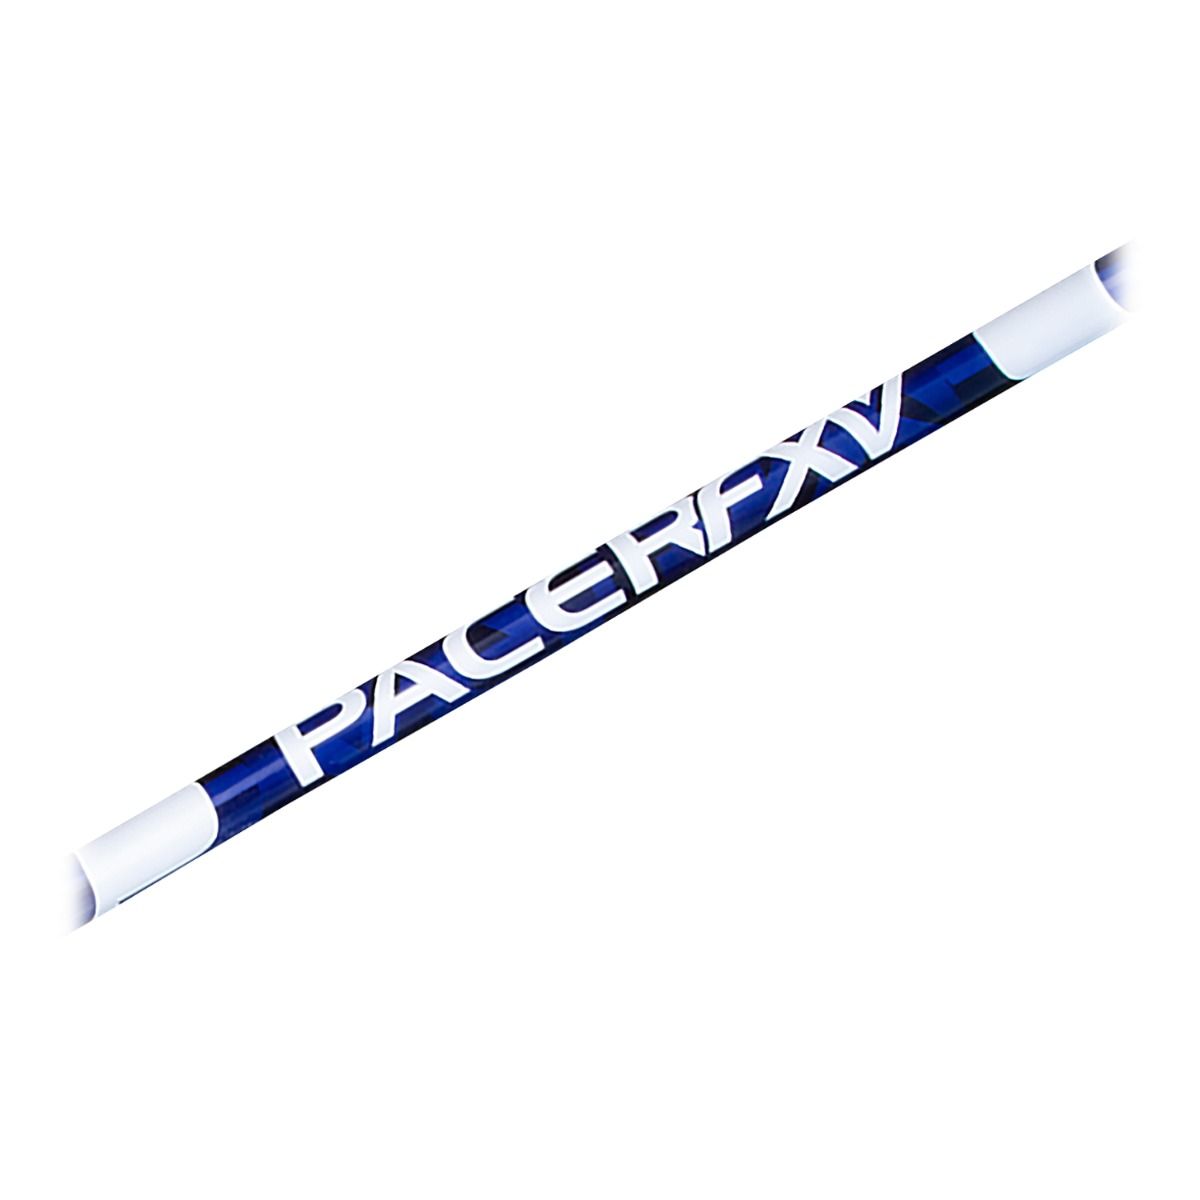 Gill PacerFXV 12' 6" Vaulting Pole